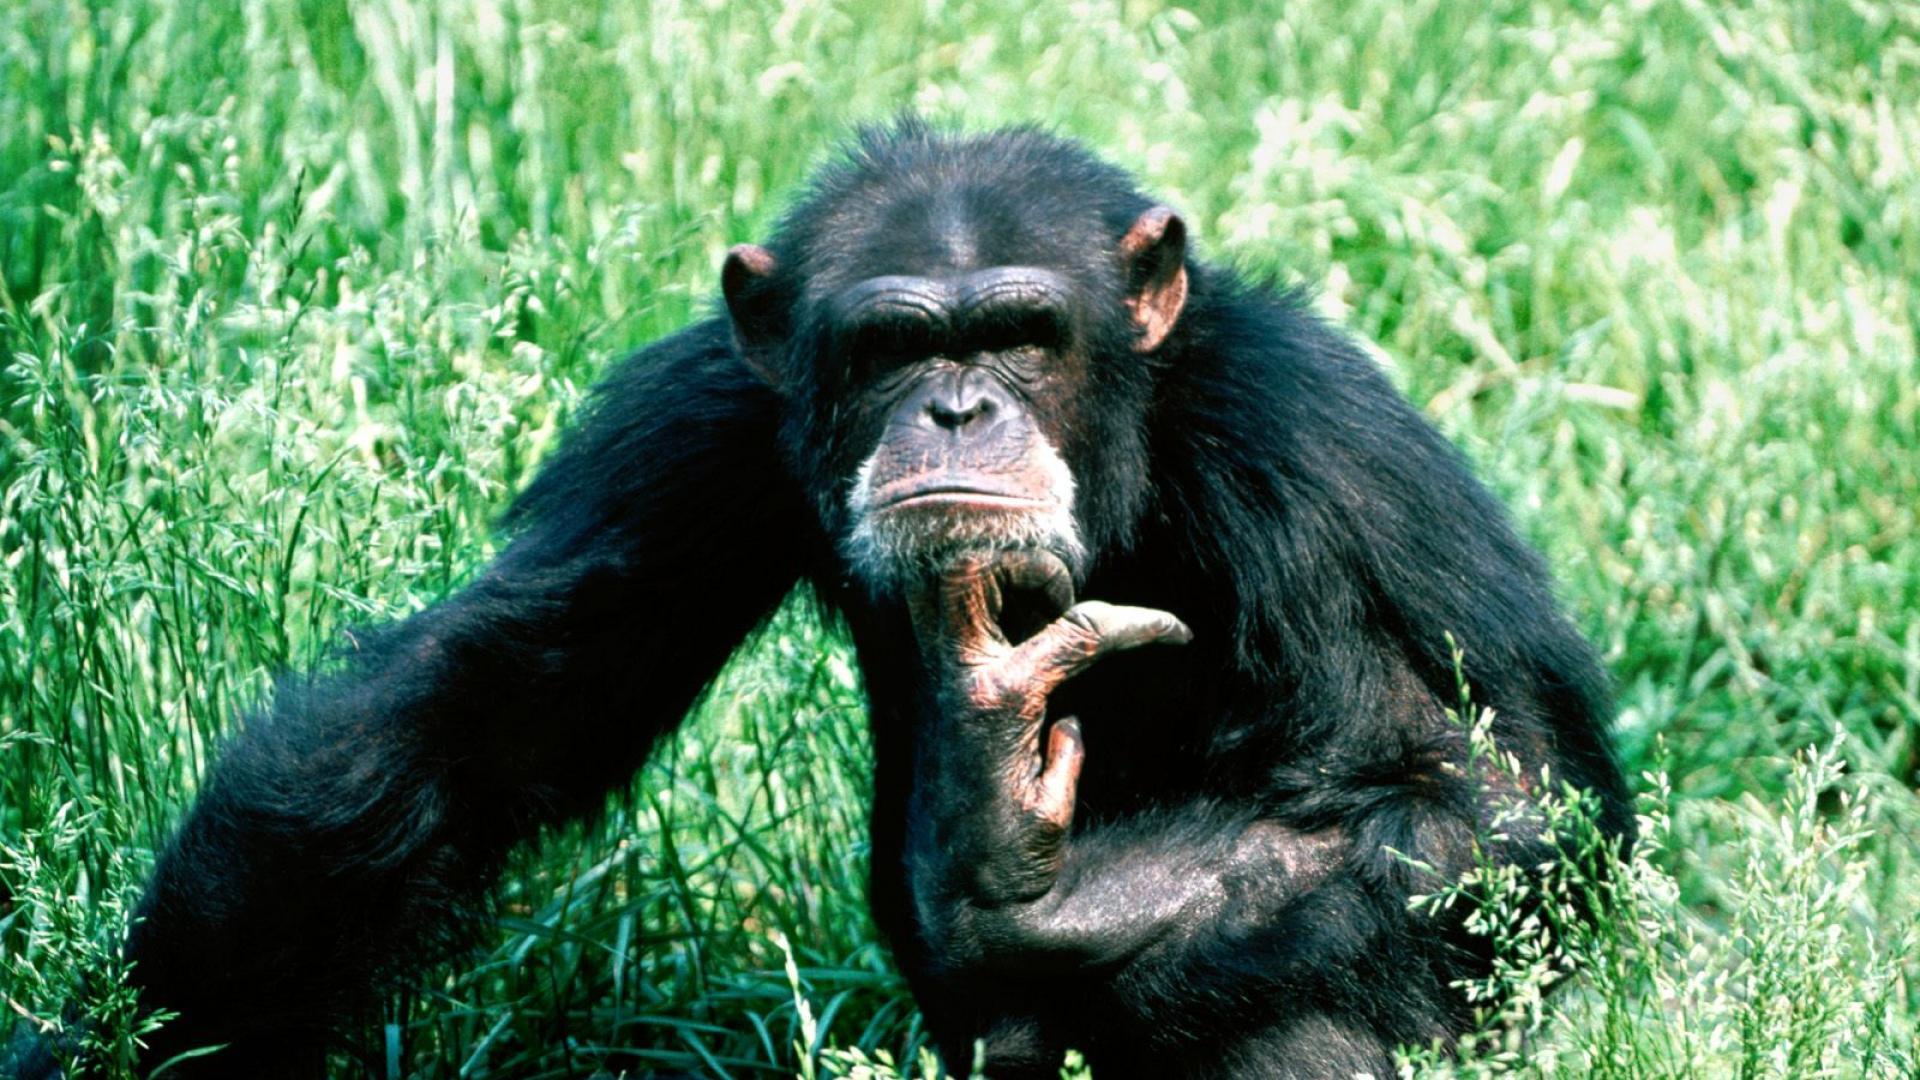 Lost In Thought Chimpanzee HD wallpaper